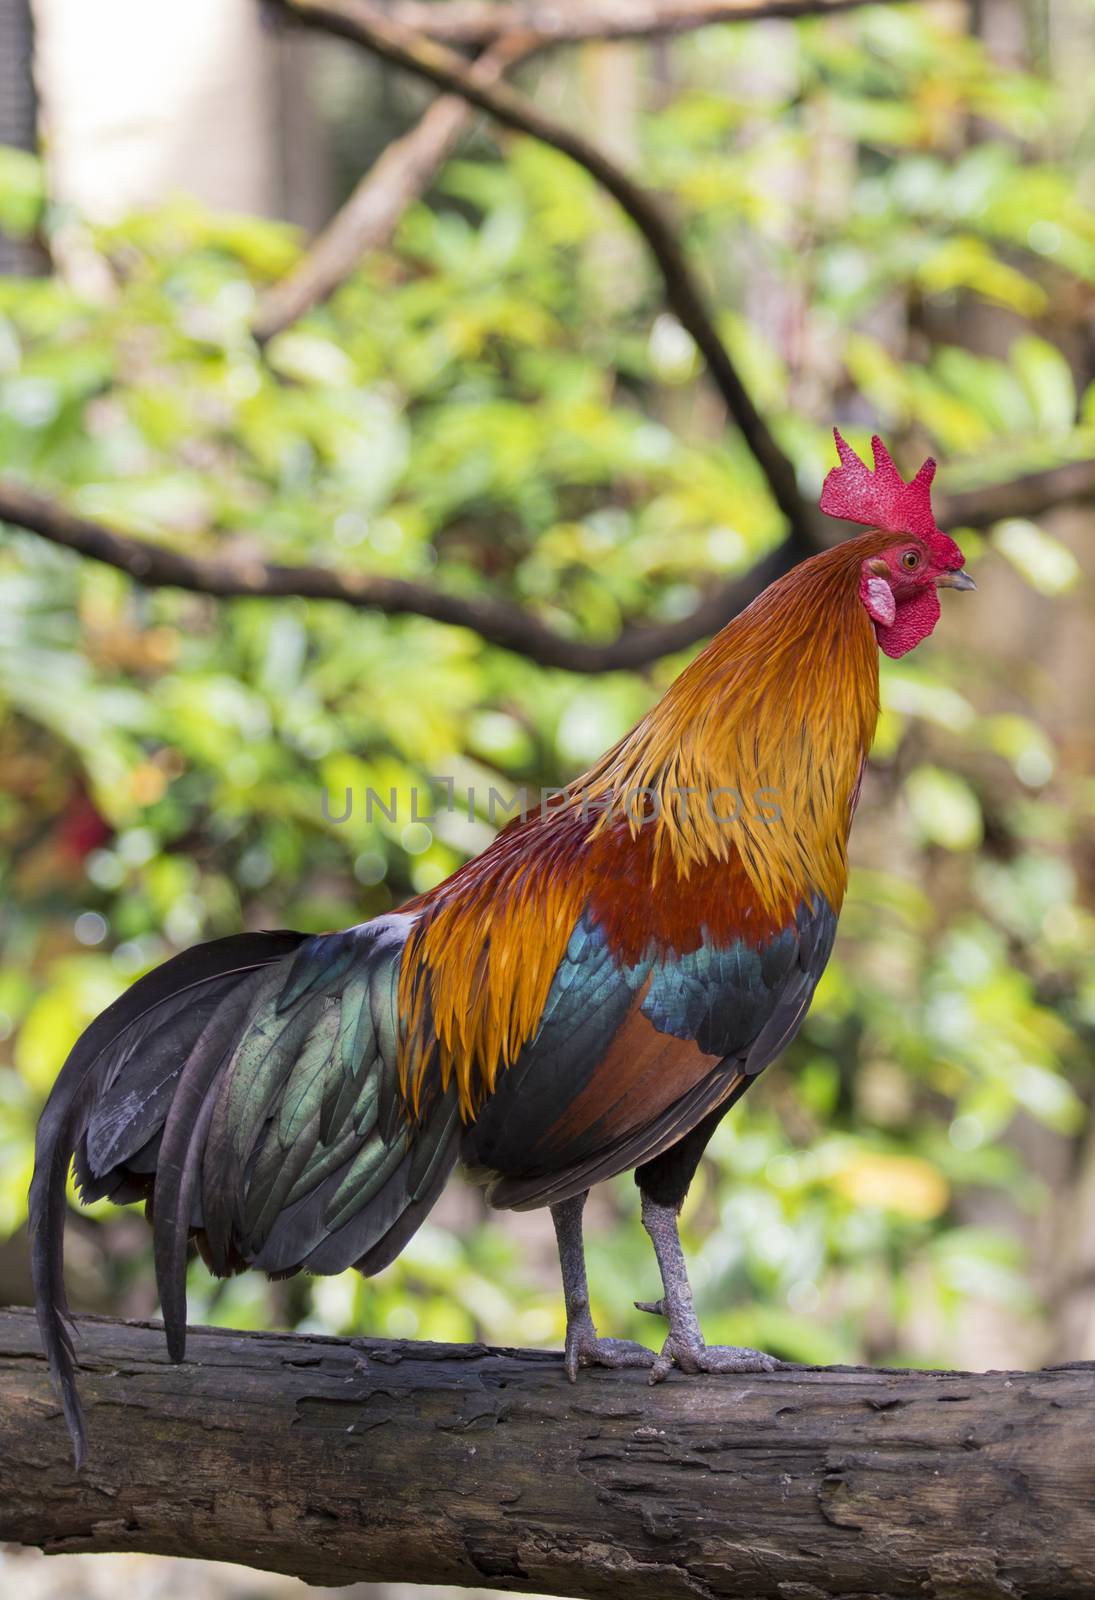 Image of a cock on nature background